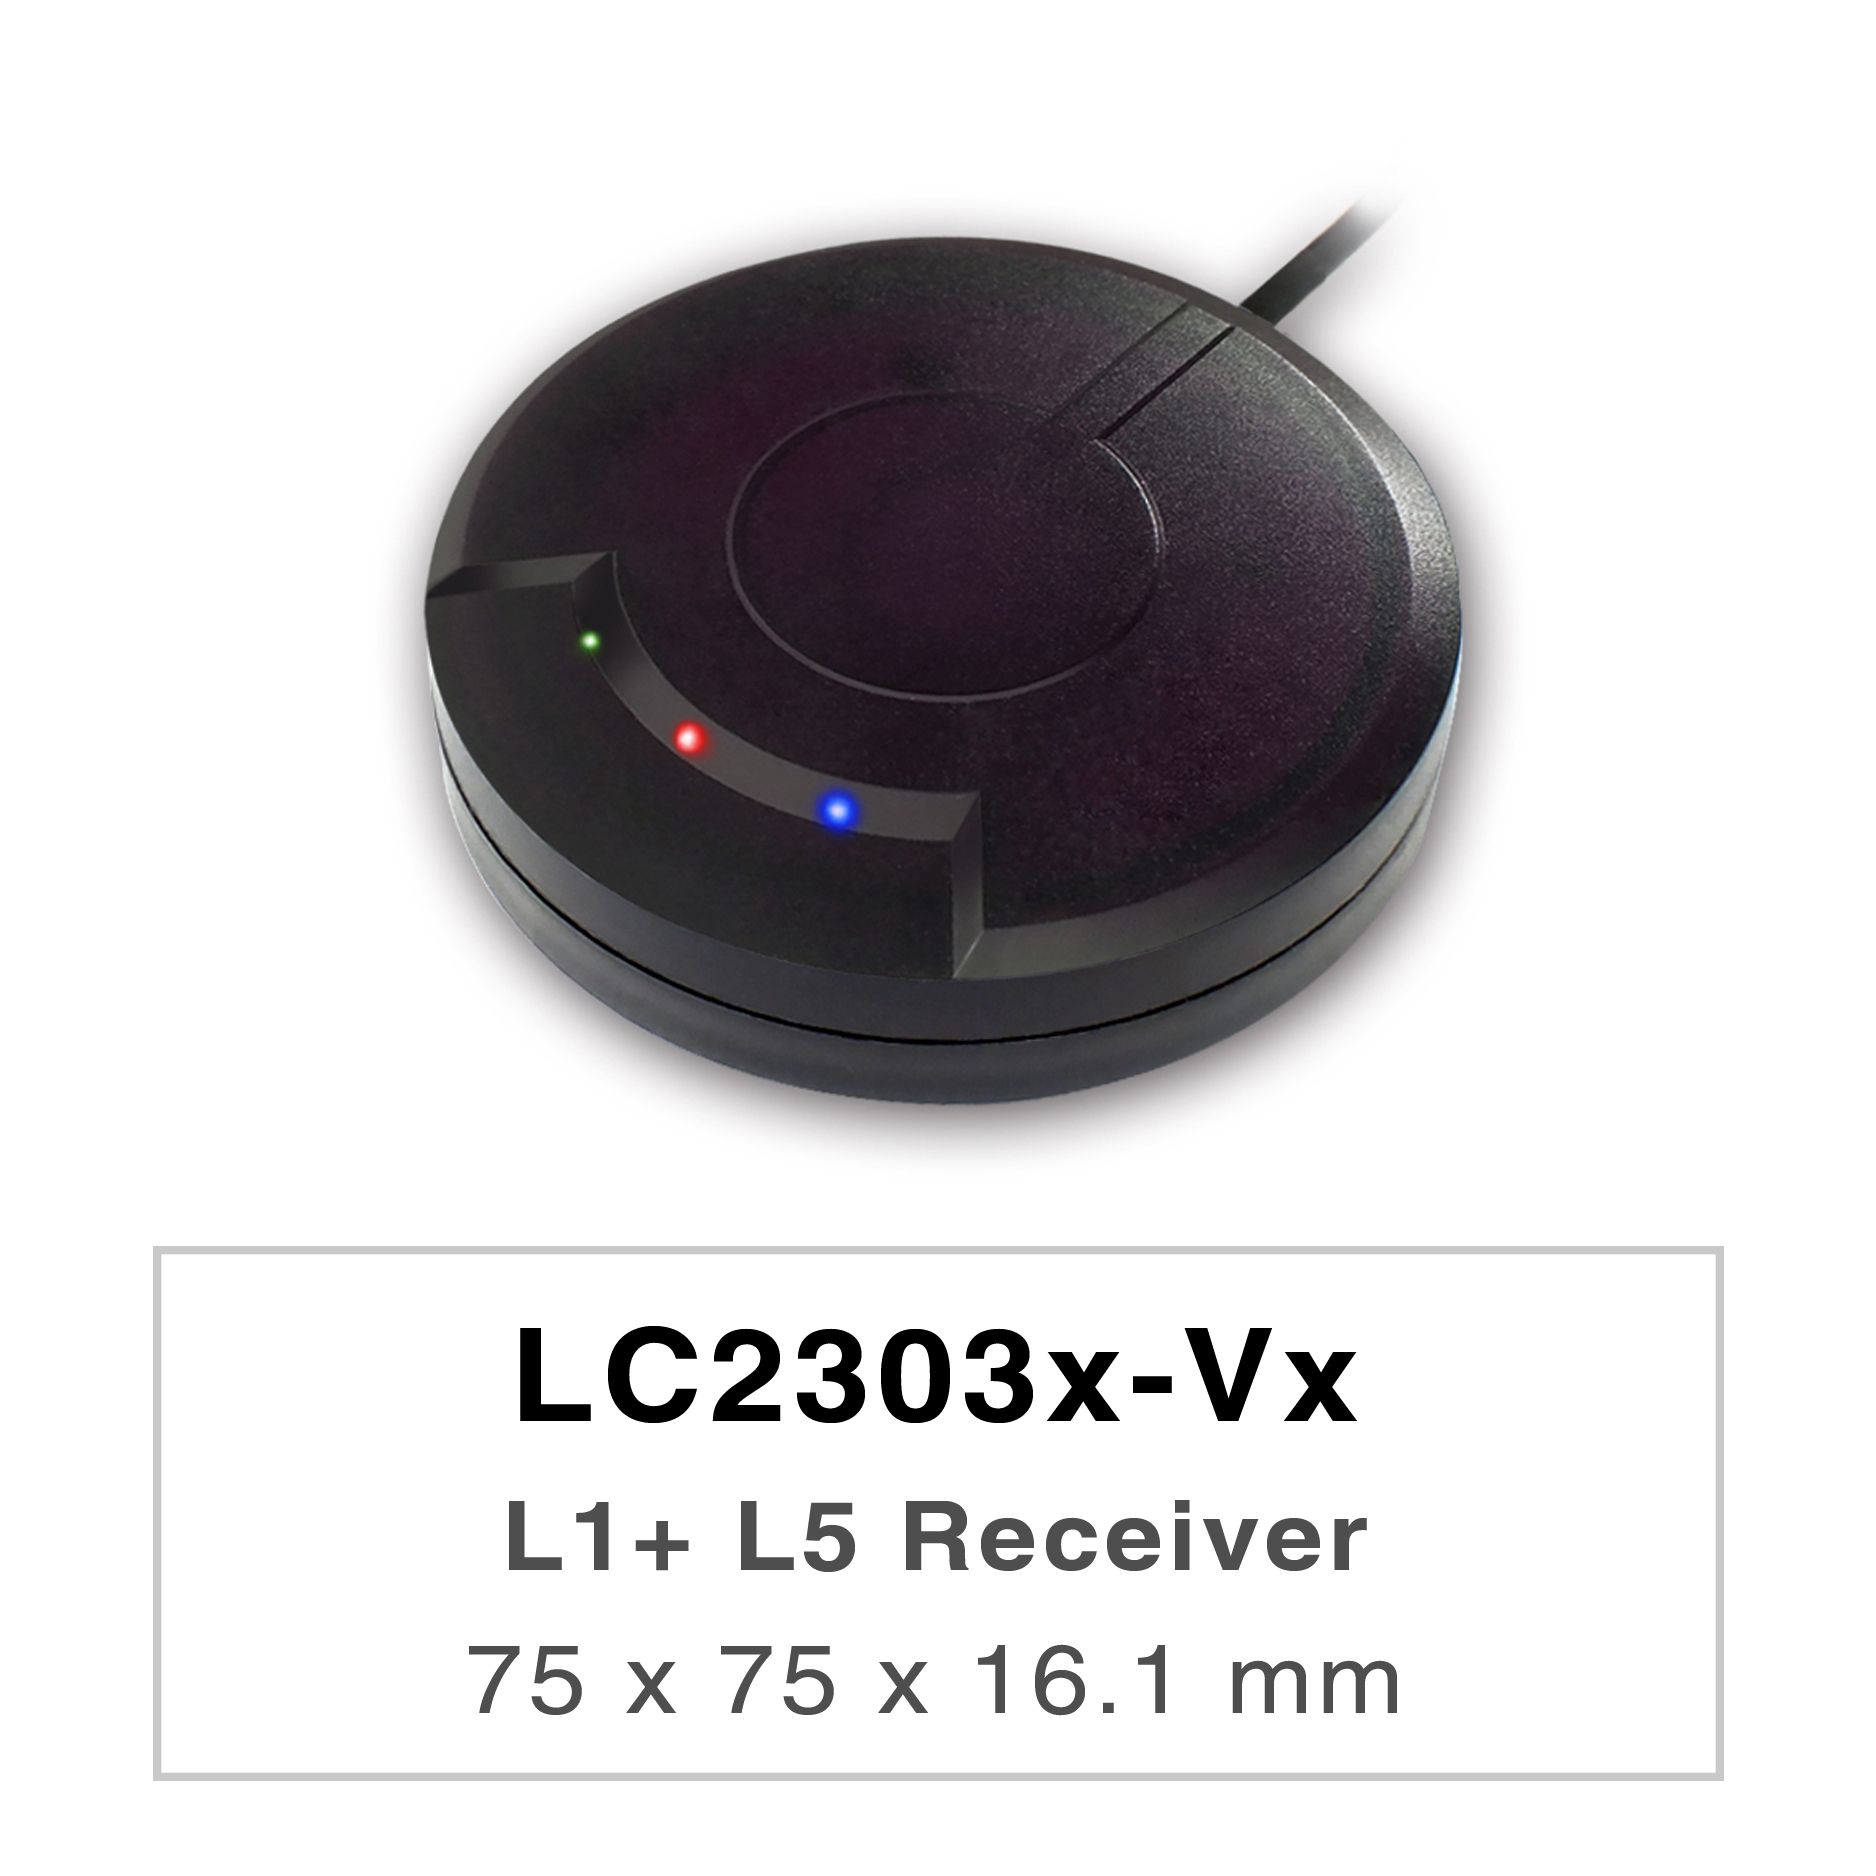 LC2303x-Vx series products are high-performance dual-band GNSS receivers (also known as GNSS mouse) that are capable of tracking all global civil navigation systems (GPS, GLONASS, BDS, GALILEO, QZSS and IRNSS).